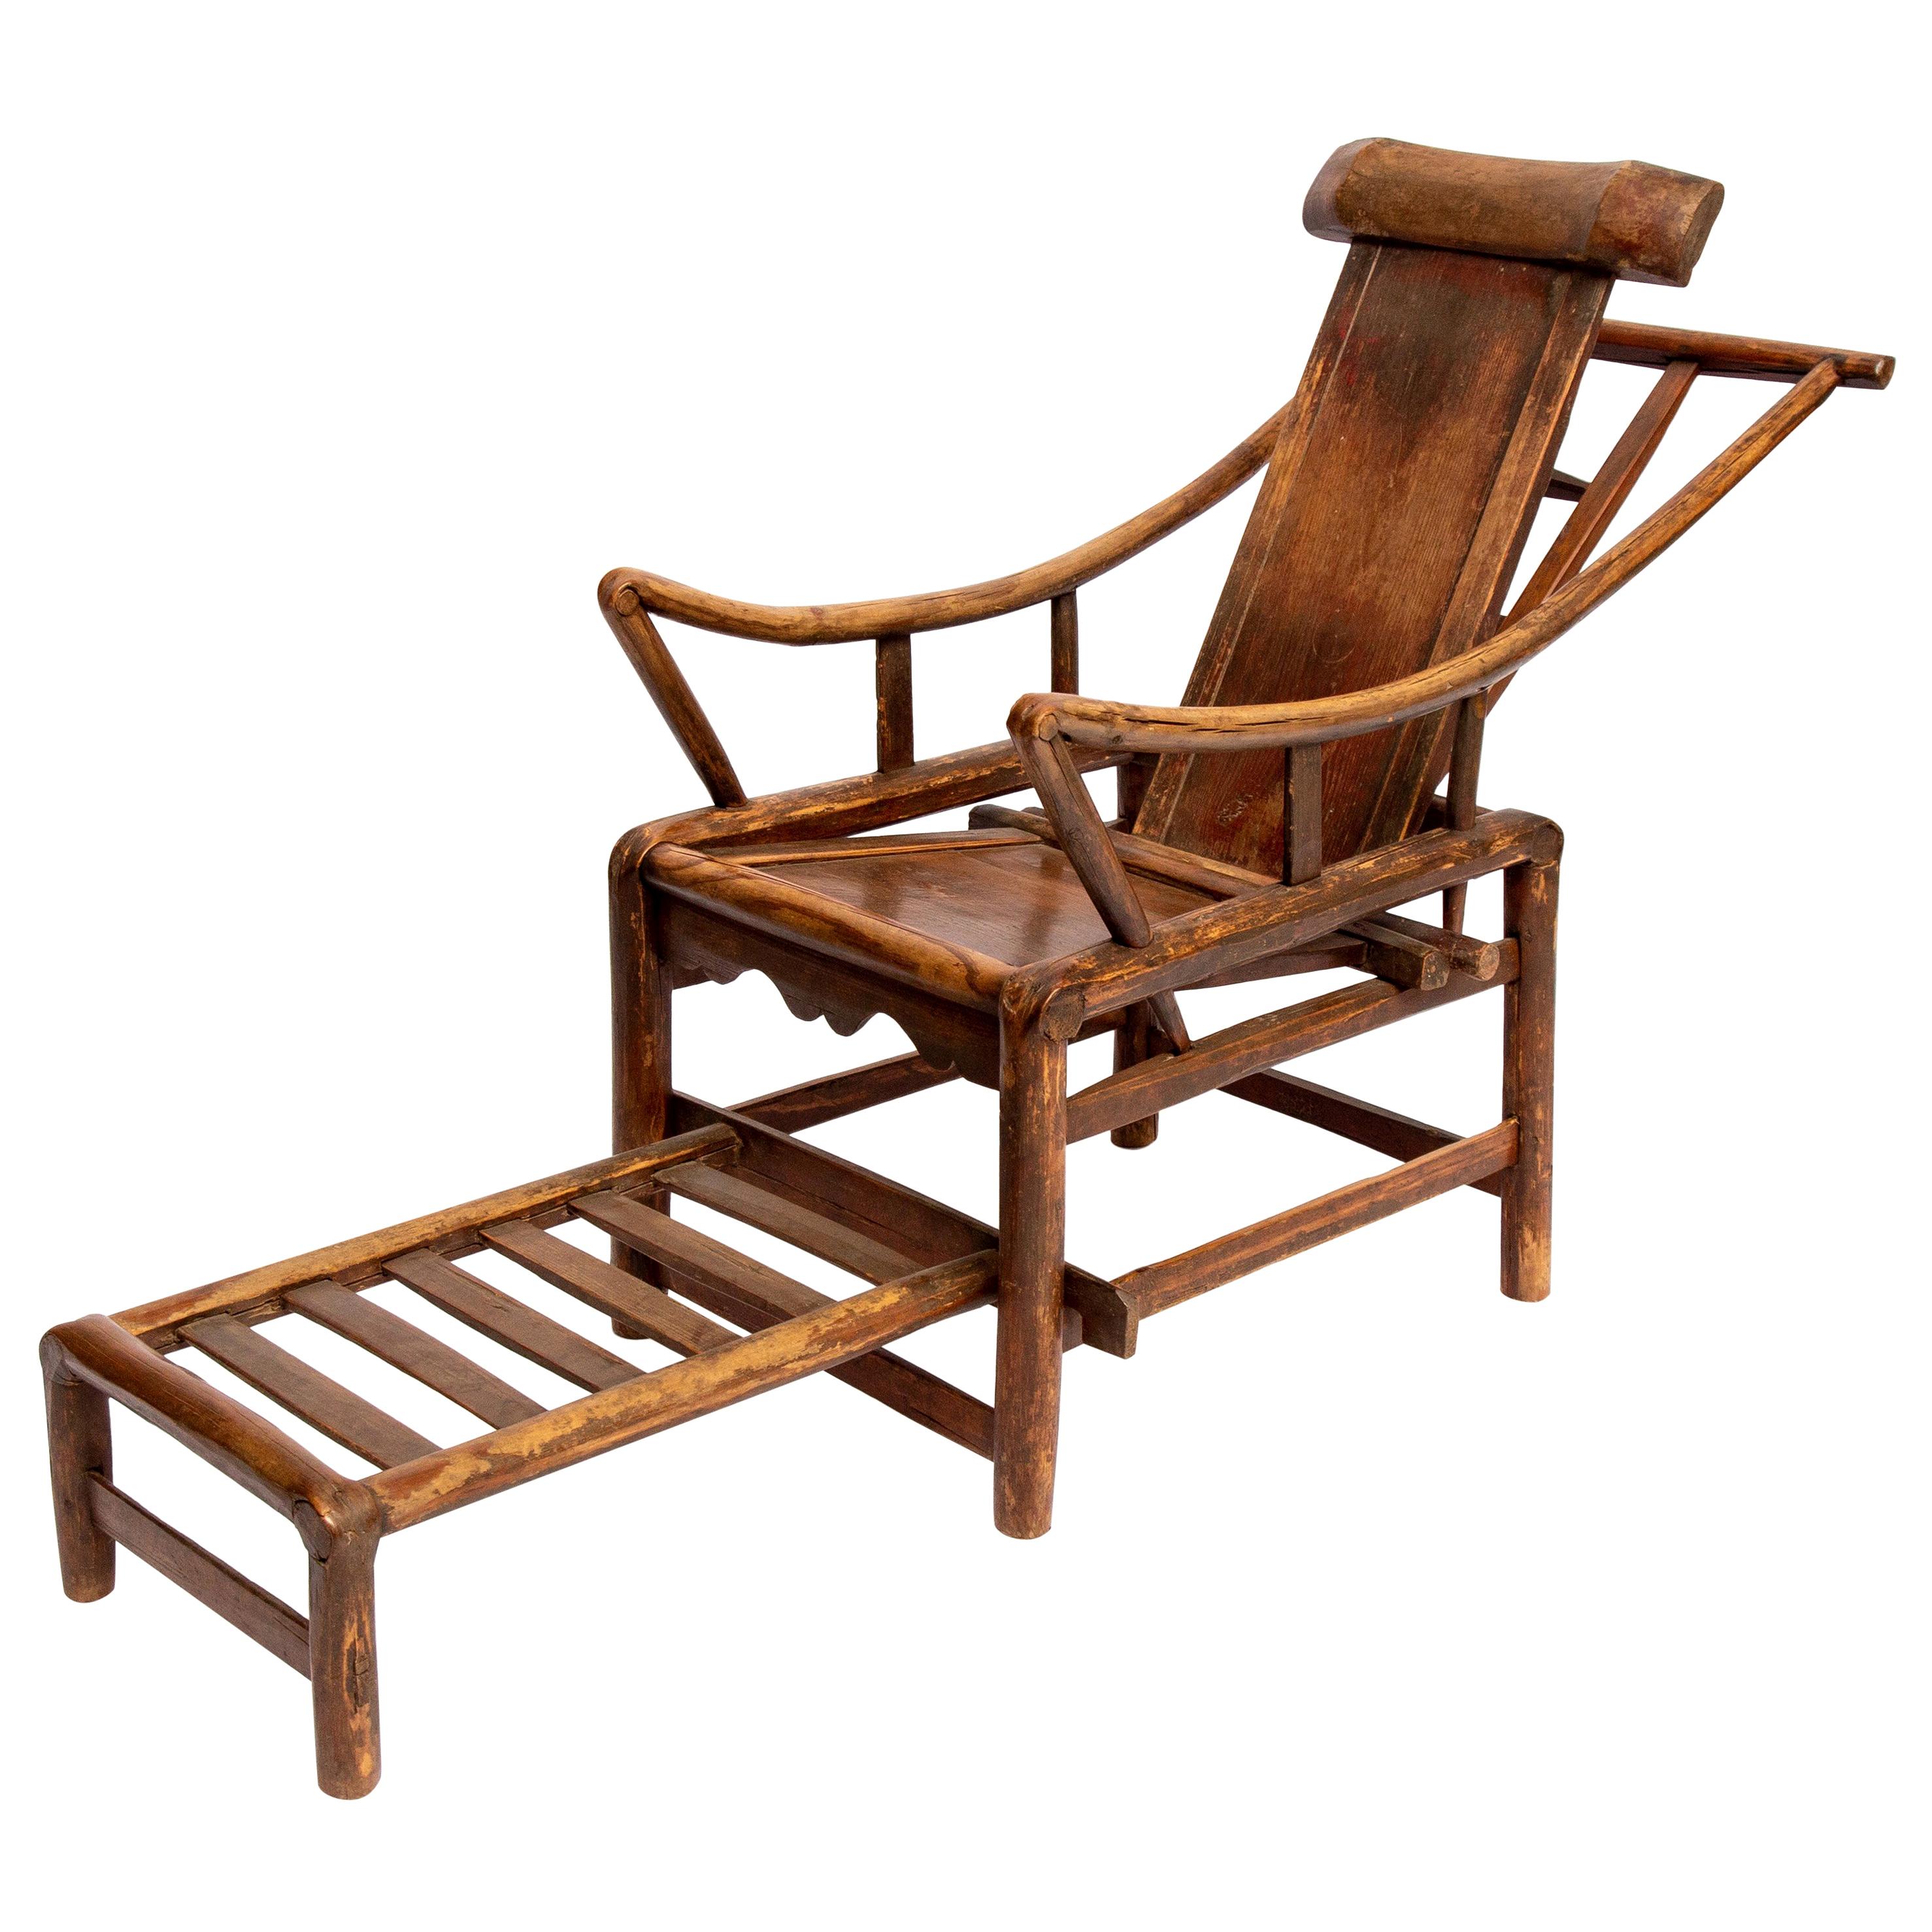 Chinese 19th Century Handcrafted Lounge Chair, 1850s